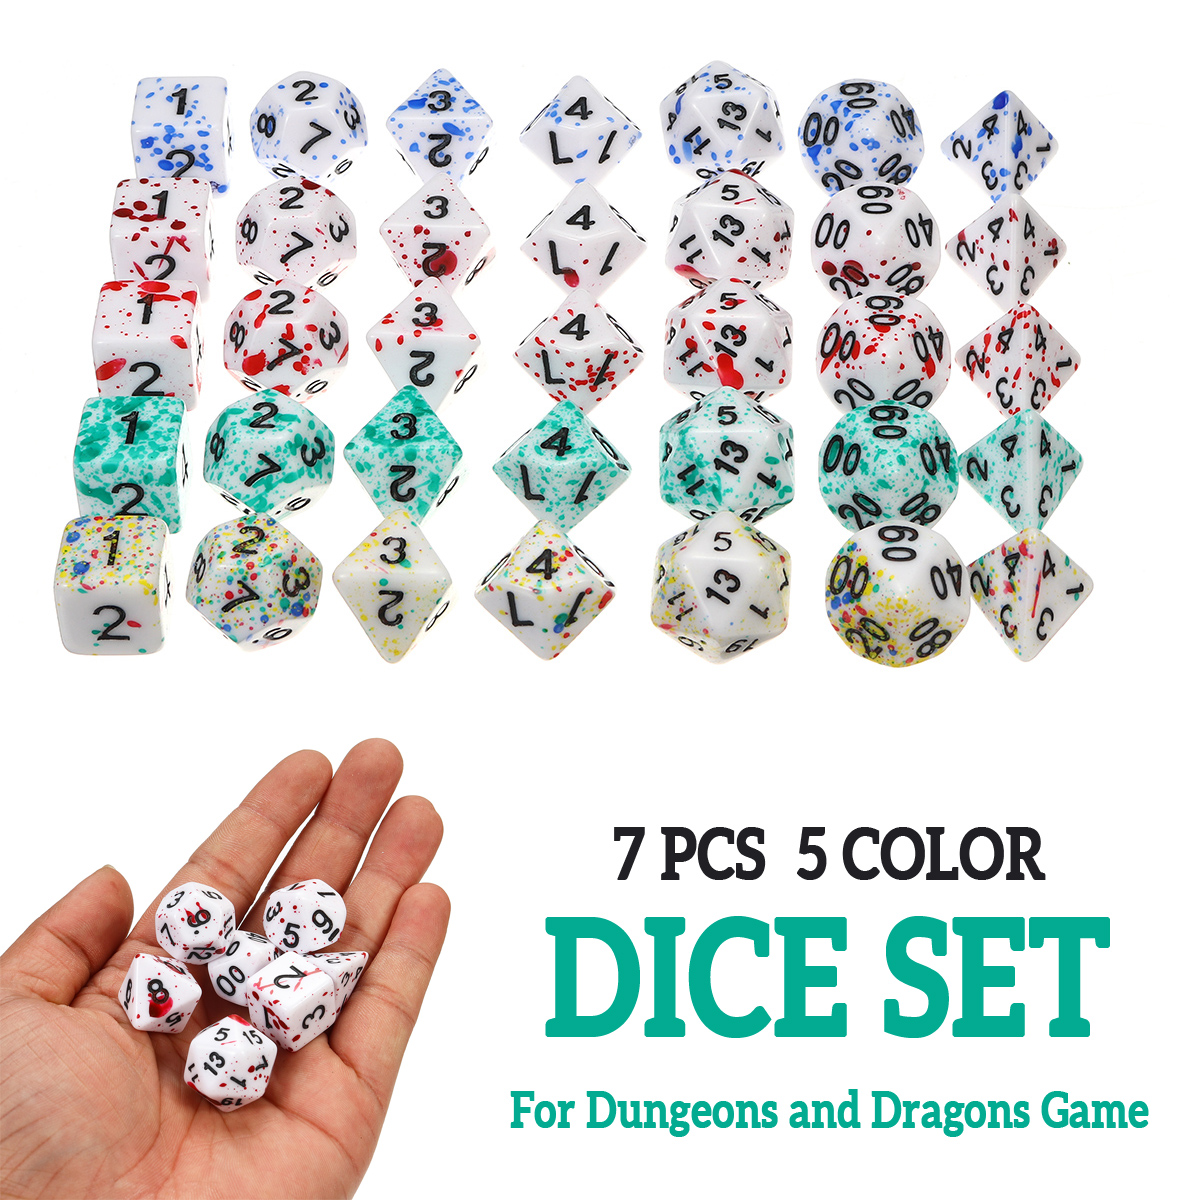 7PCS-Polyhedral-Dices-Set-For-DND-Dungeons--Dragons-Dice-Desktop-RPG-Game-1660865-3